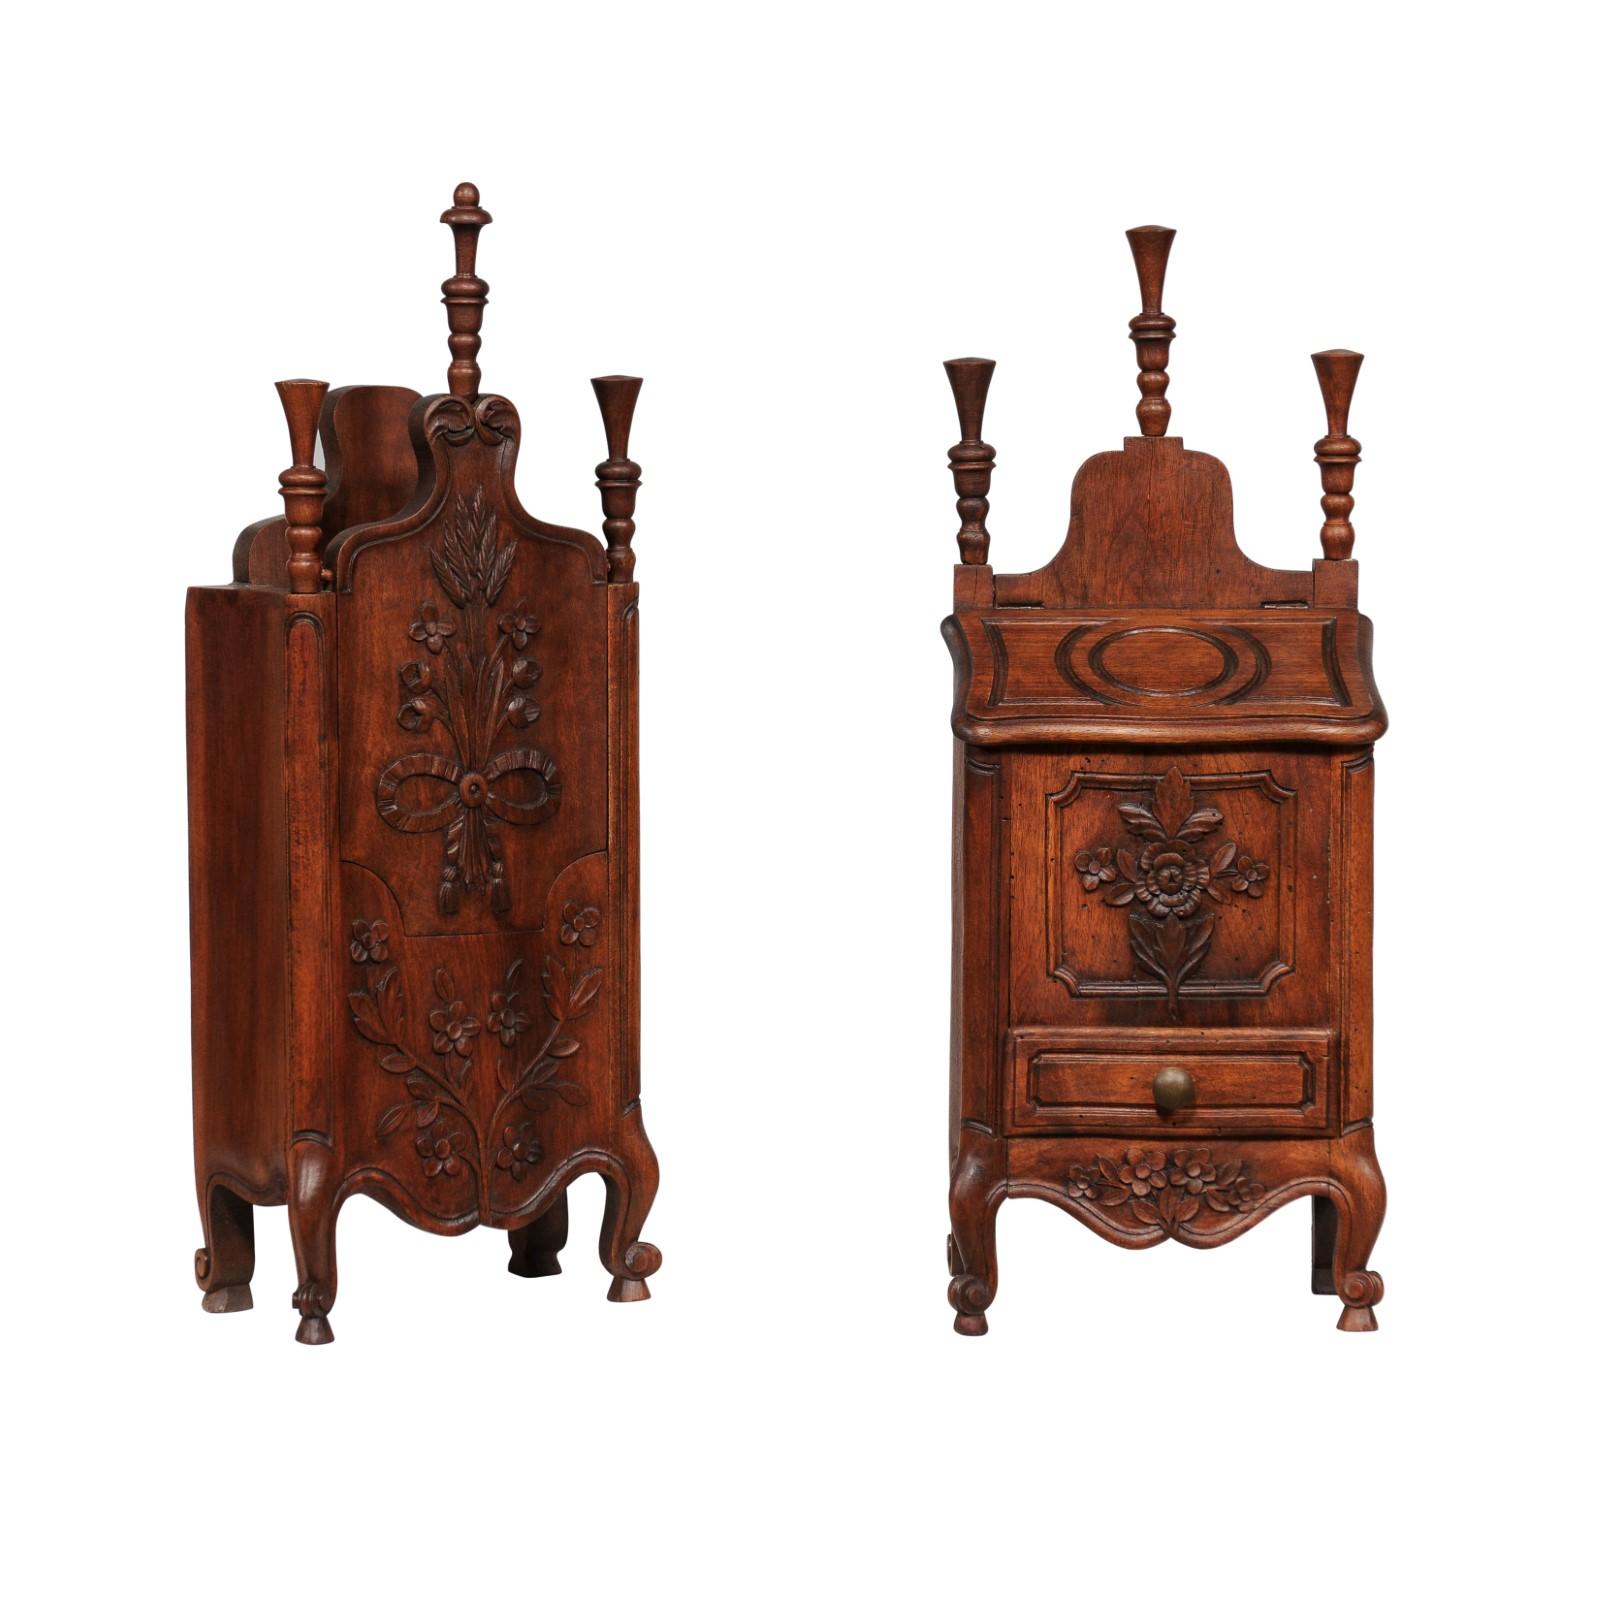 Two French Louis XV style walnut farinerio flour boxes from the 19th century with carved floral motifs, cabriole legs and tall finials. They are priced and sold each. This charming pair of French Louis XV style walnut 'farinerio' flour boxes, dating